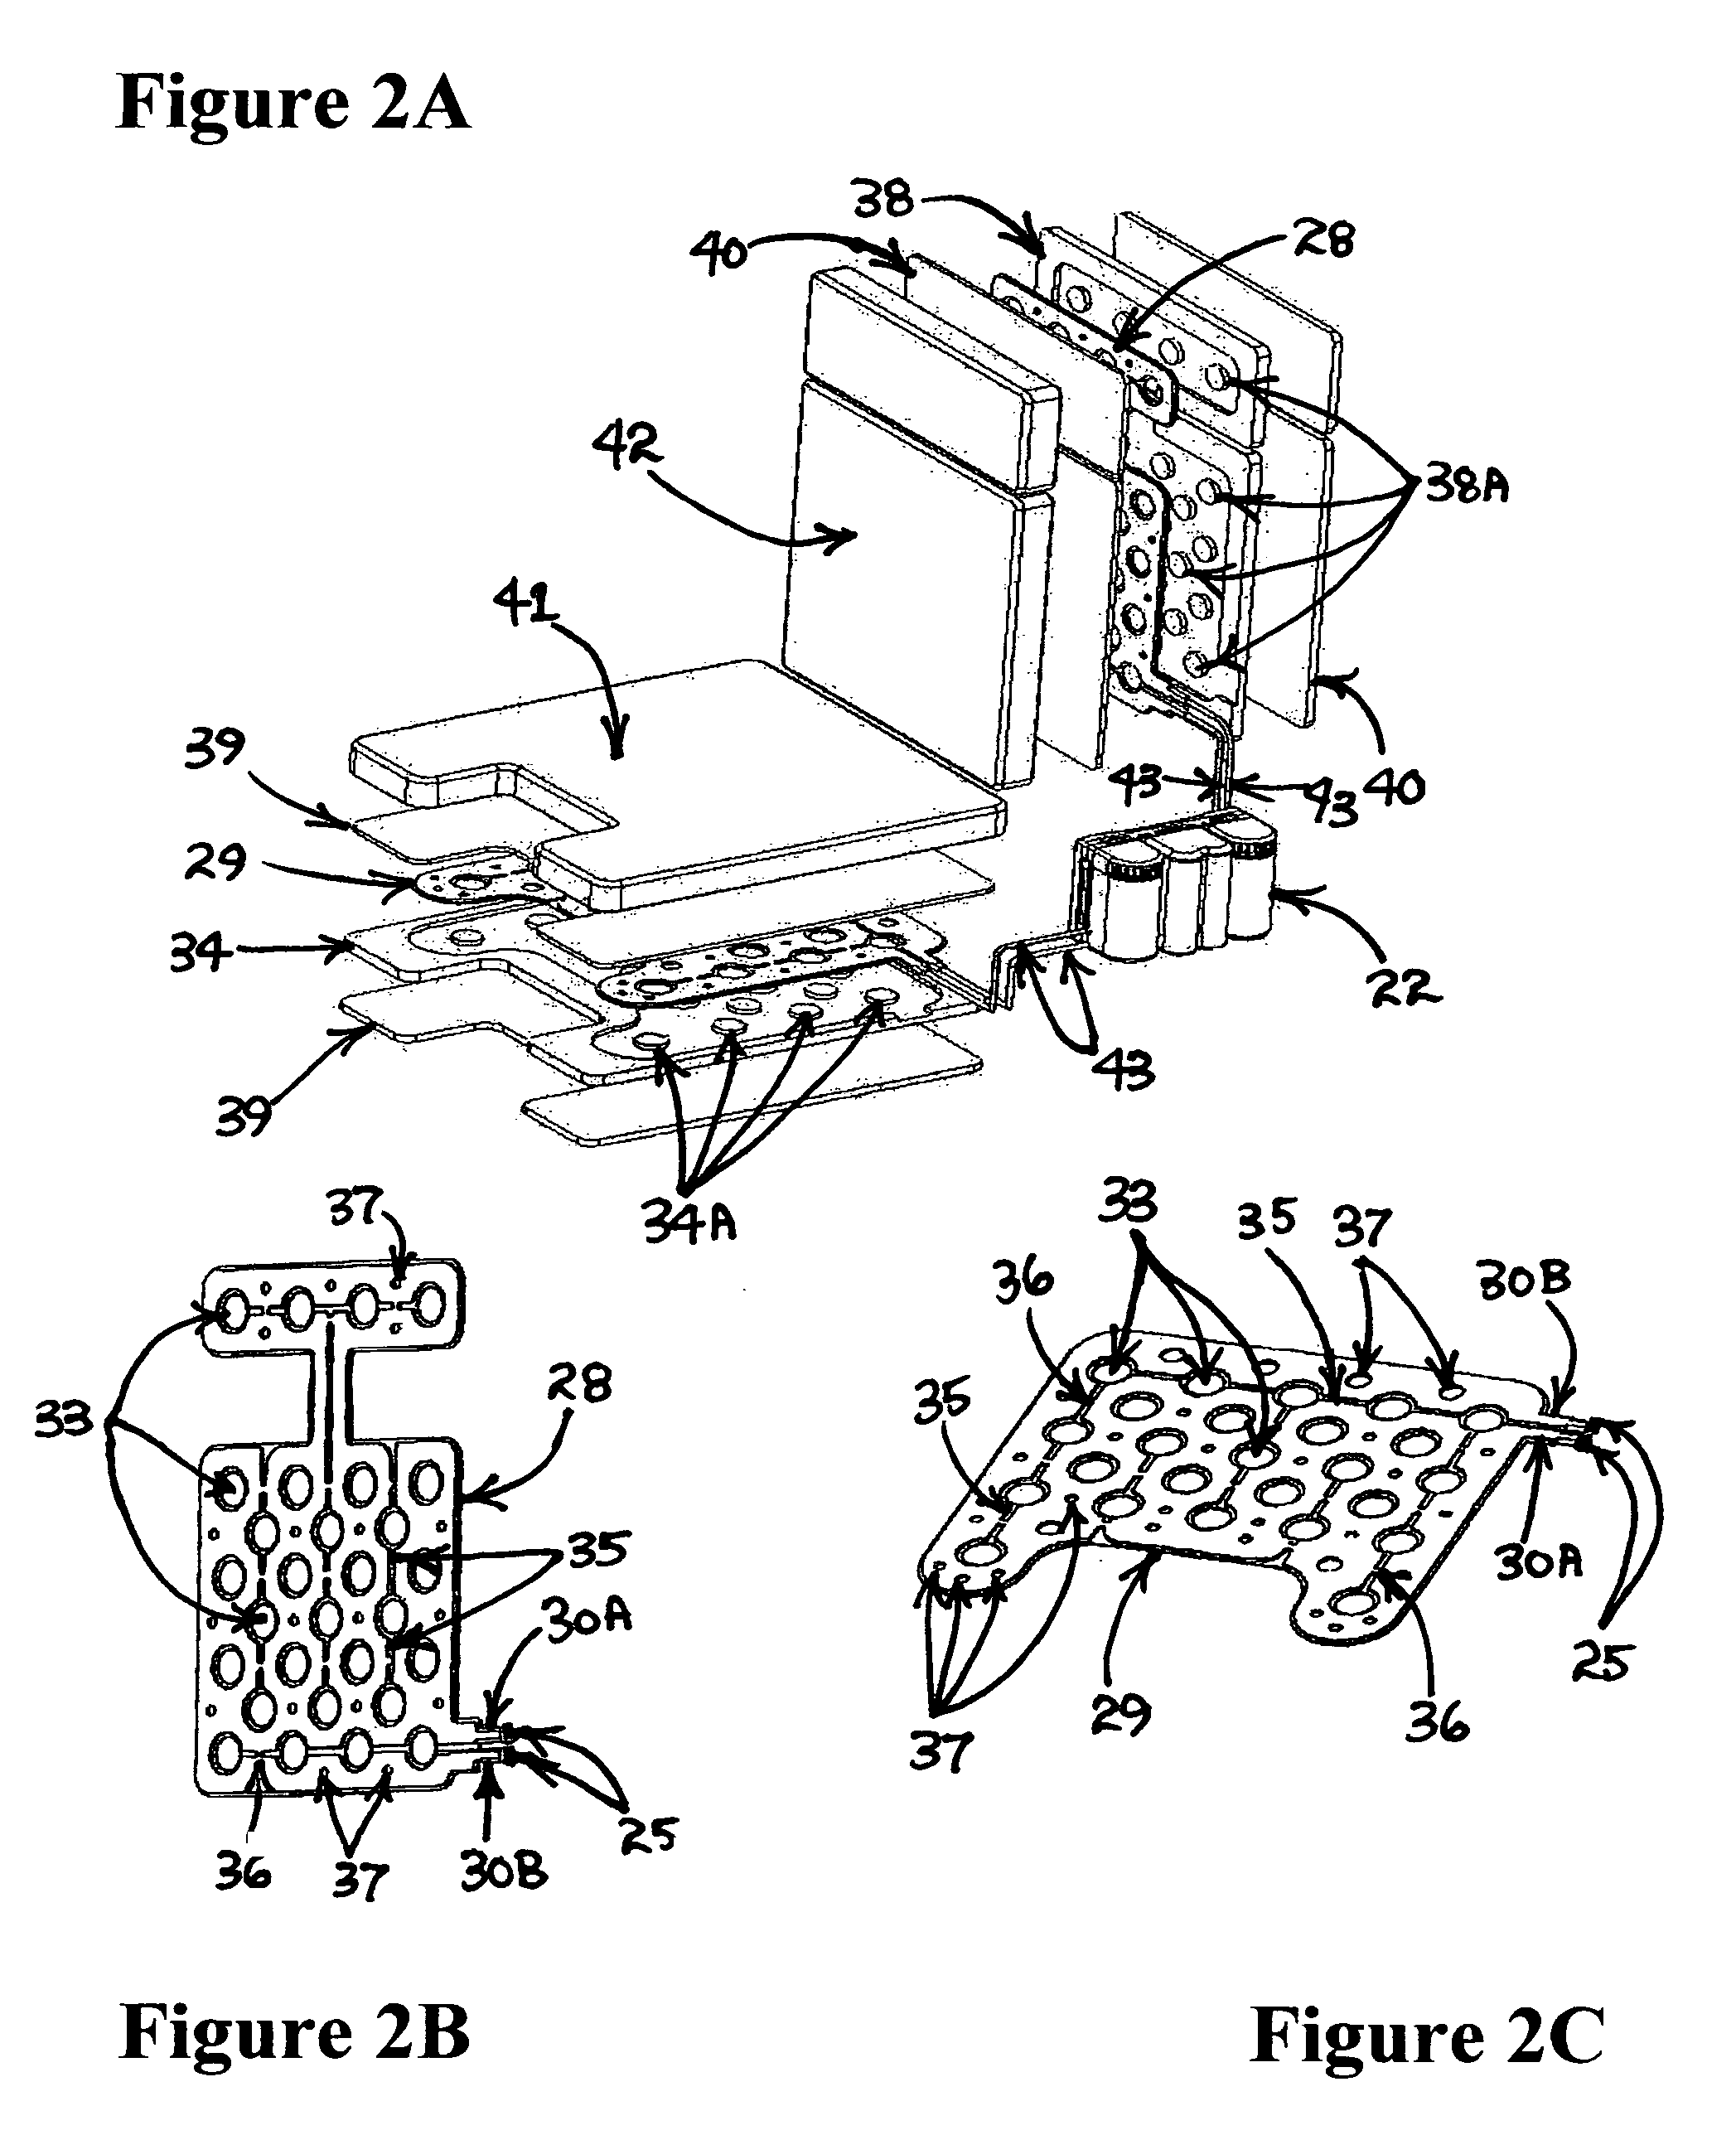 Personal back rest and seat cooling and heating system